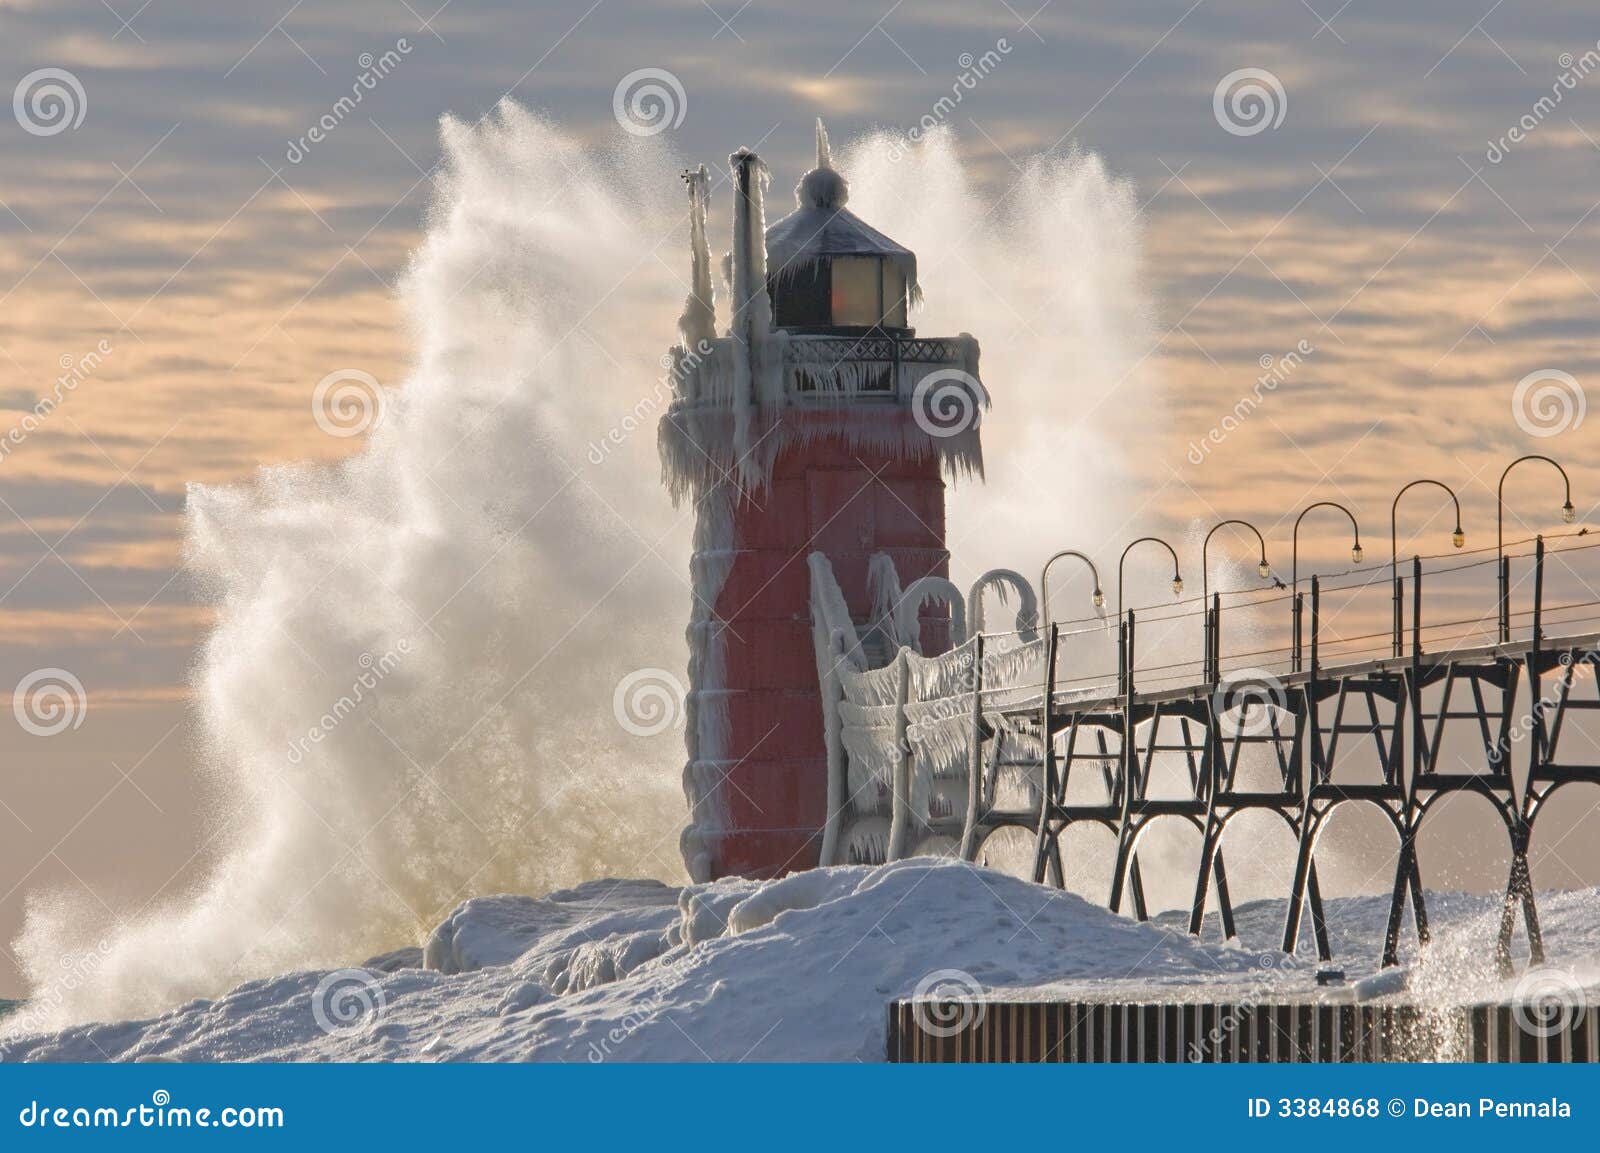 south haven lighthouse winter